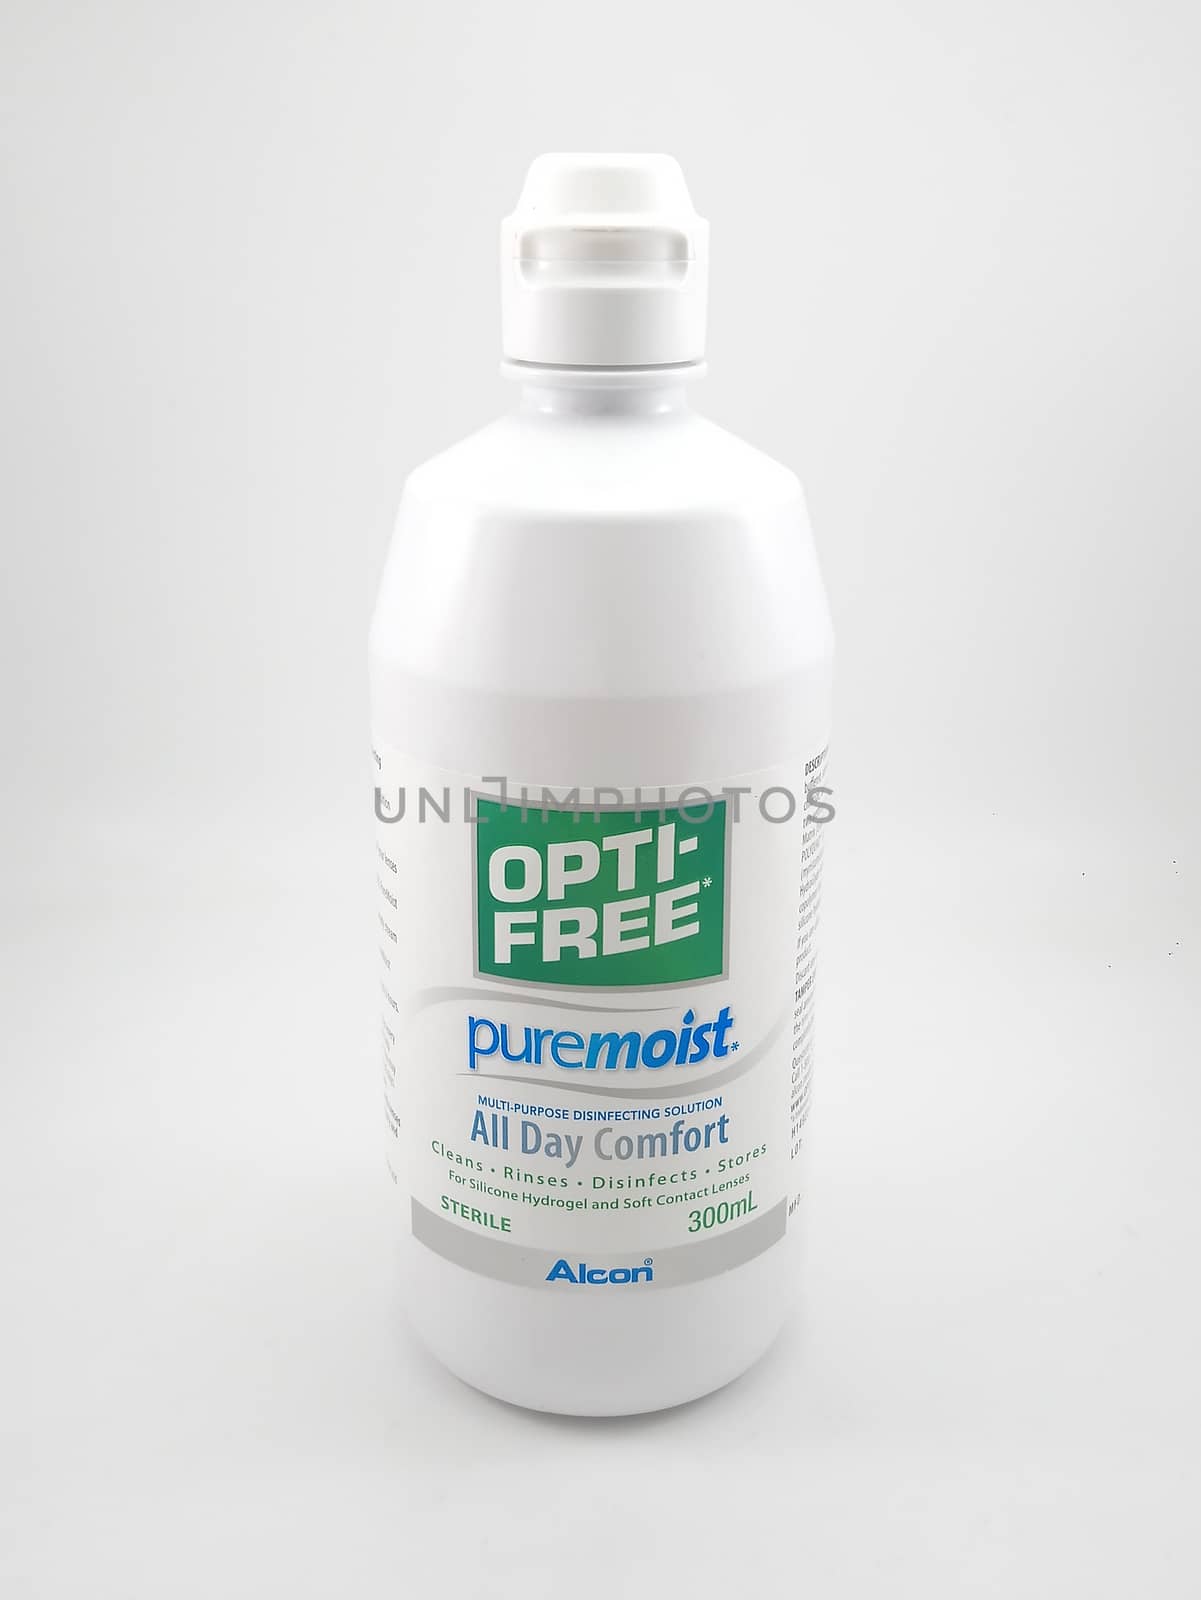 Optifree pure moist multi purpose disinfecting solution for cont by imwaltersy